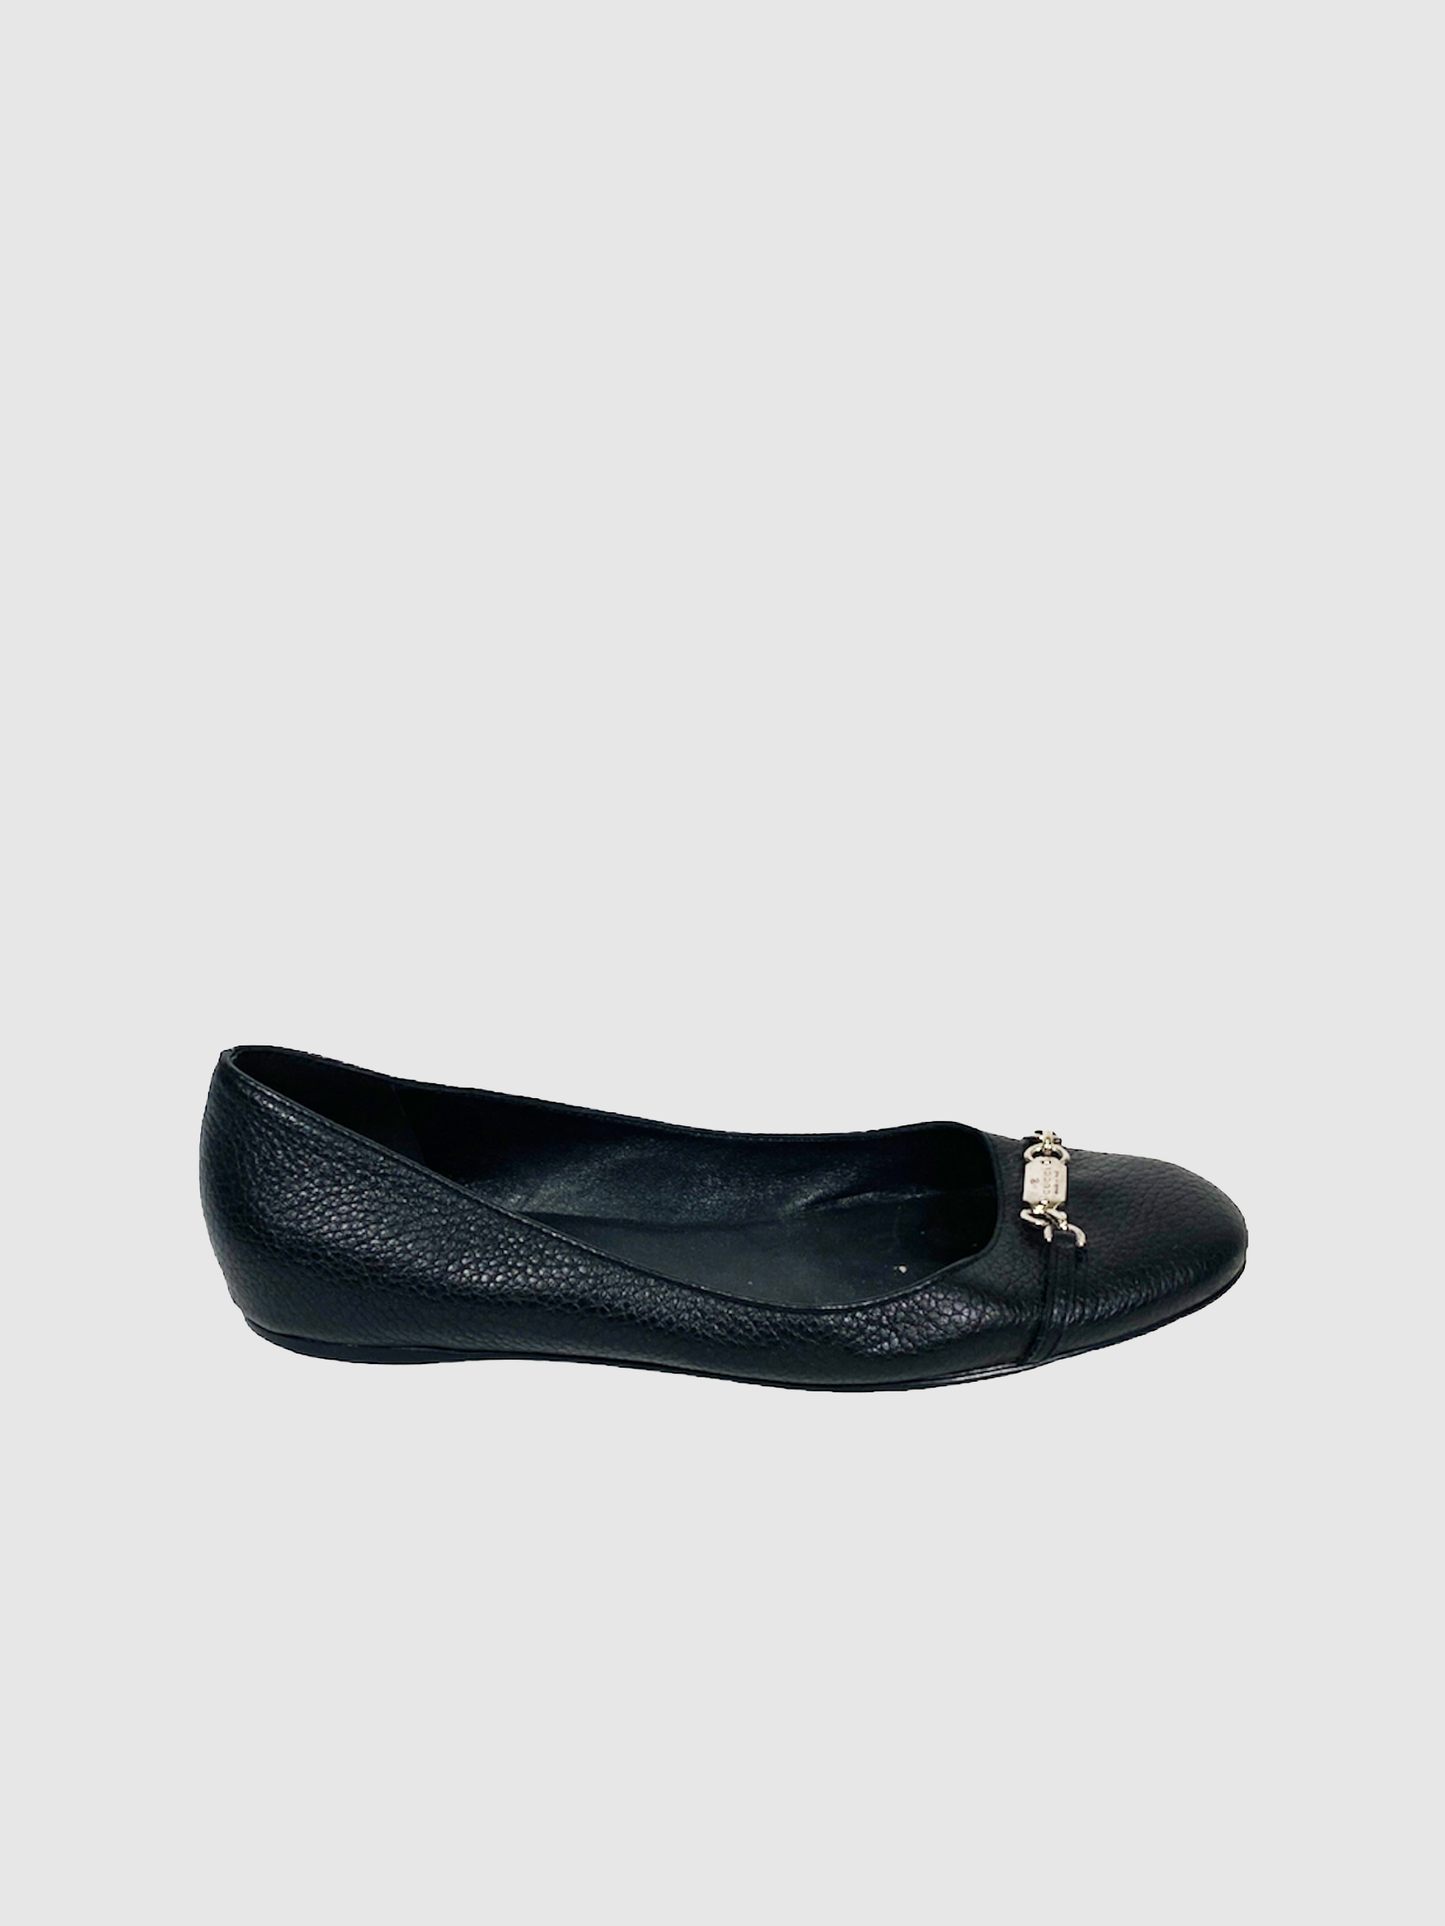 Gucci Black Pebbled Leather Flats - Size 40.5